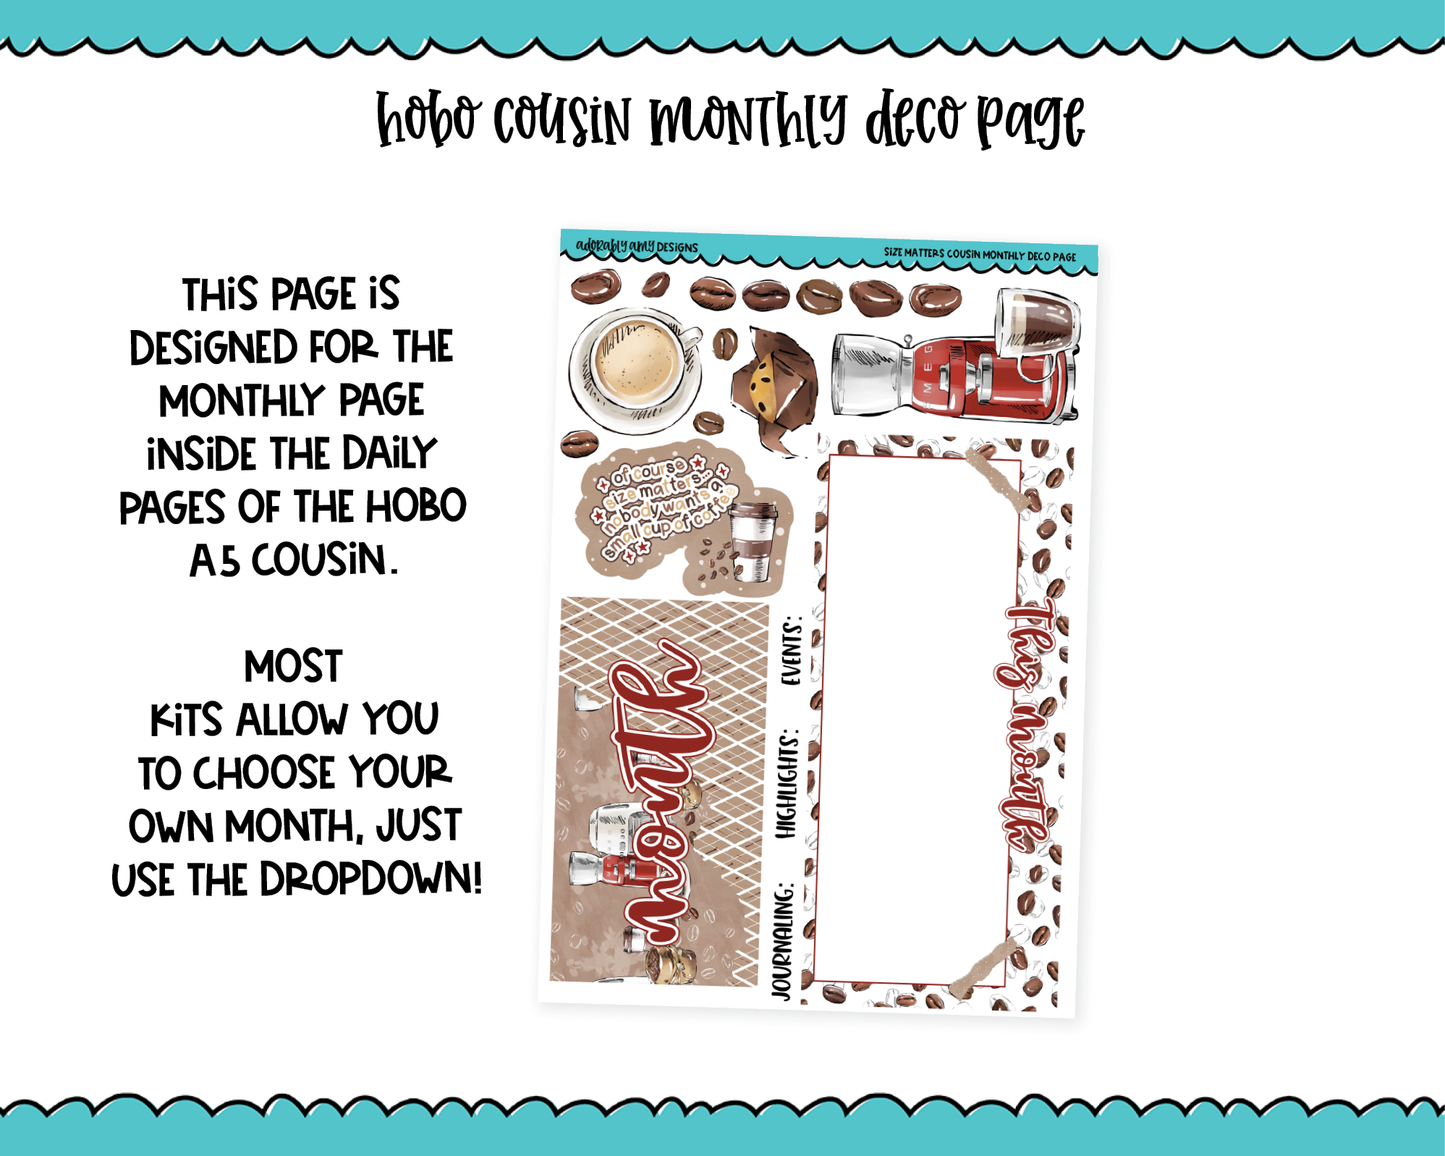 Hobonichi Cousin Monthly Pick Your Month Size Matters Coffee Themed Planner Sticker Kit for Hobo Cousin or Similar Planners